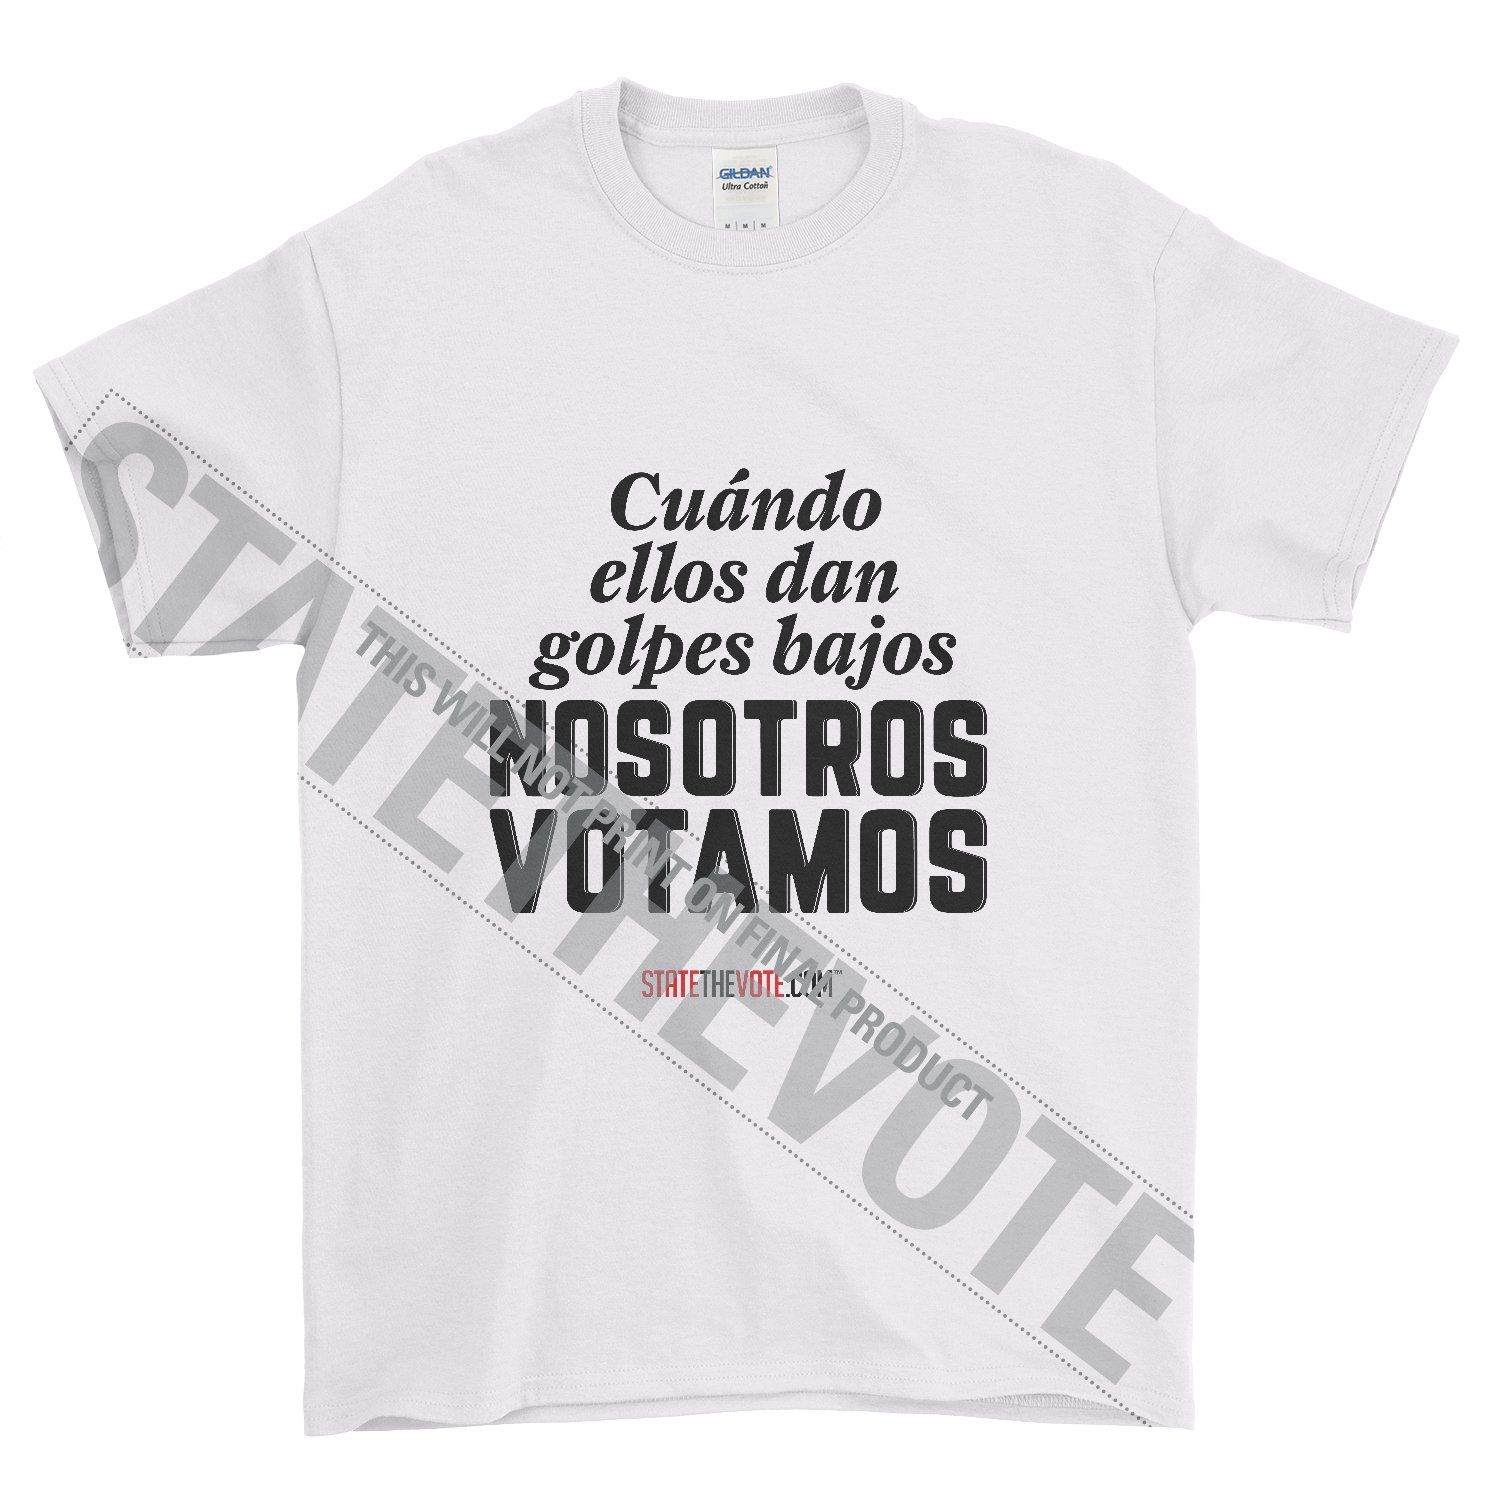 State the Vote Shirts for Voters|Voting|Men's/Women's|Spanish|Democrat